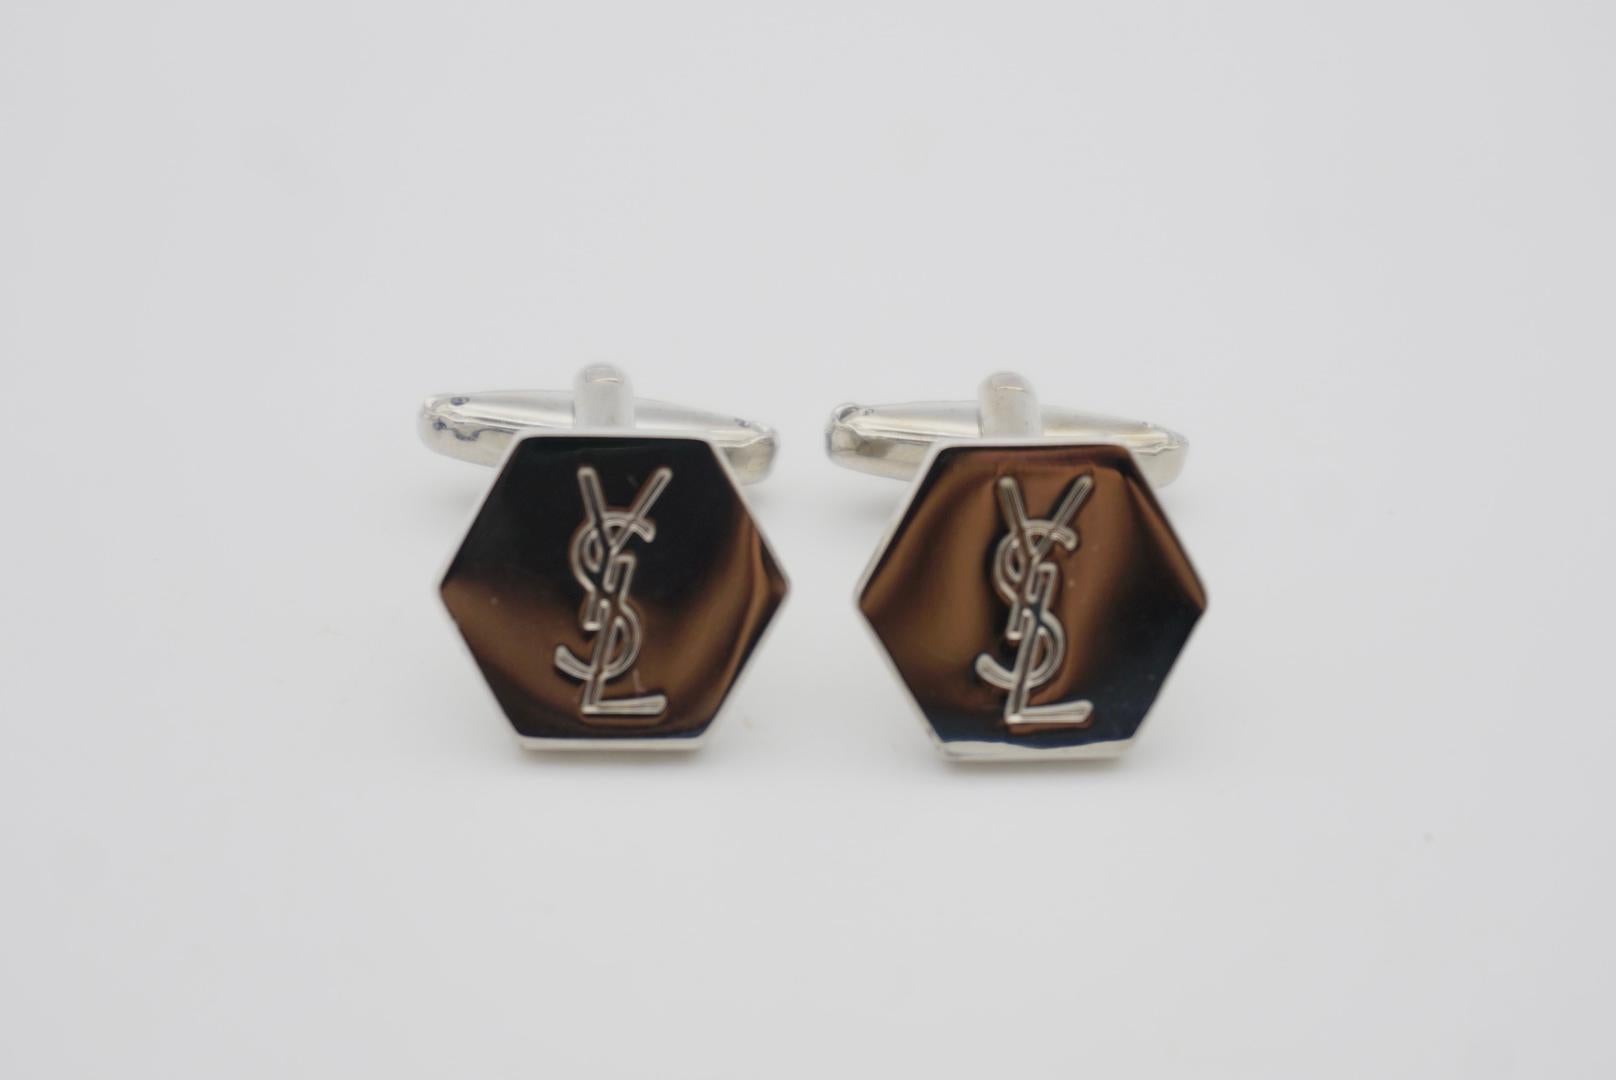 Yves Saint Laurent Classic Logo Hallmark YSL Hexagon Cufflinks, Silver Plated In Excellent Condition For Sale In Wokingham, England